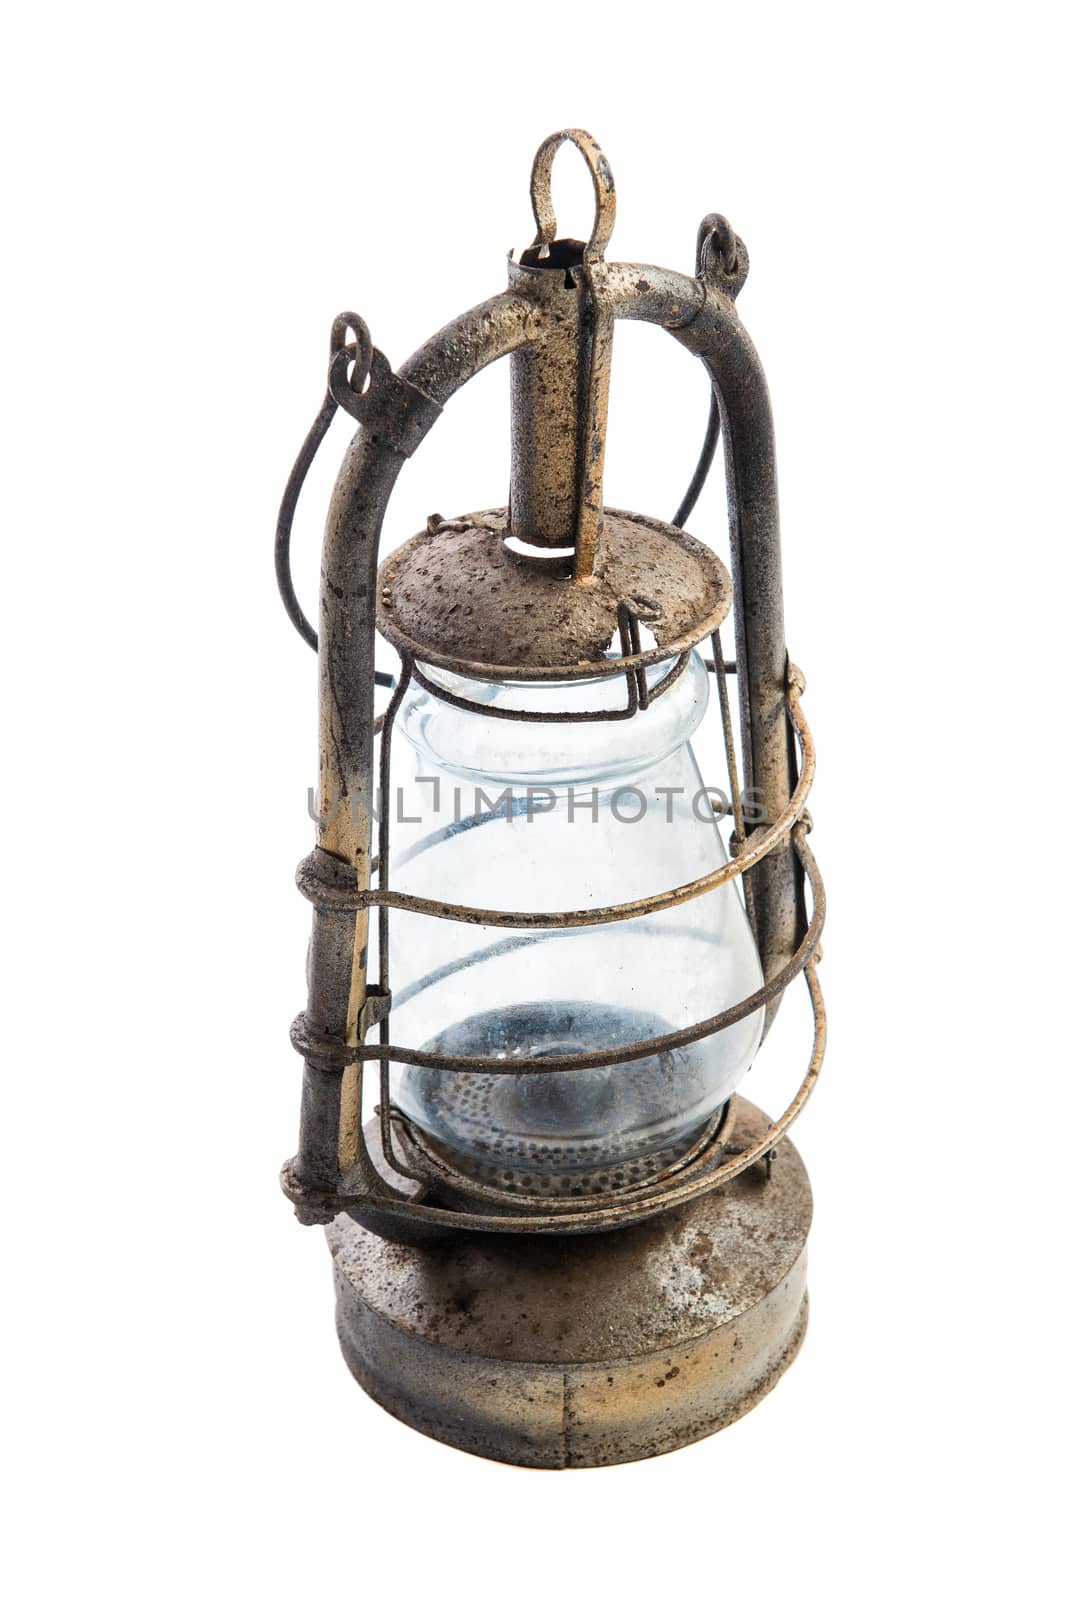 Old classic rustic oil lamp isolated on white background